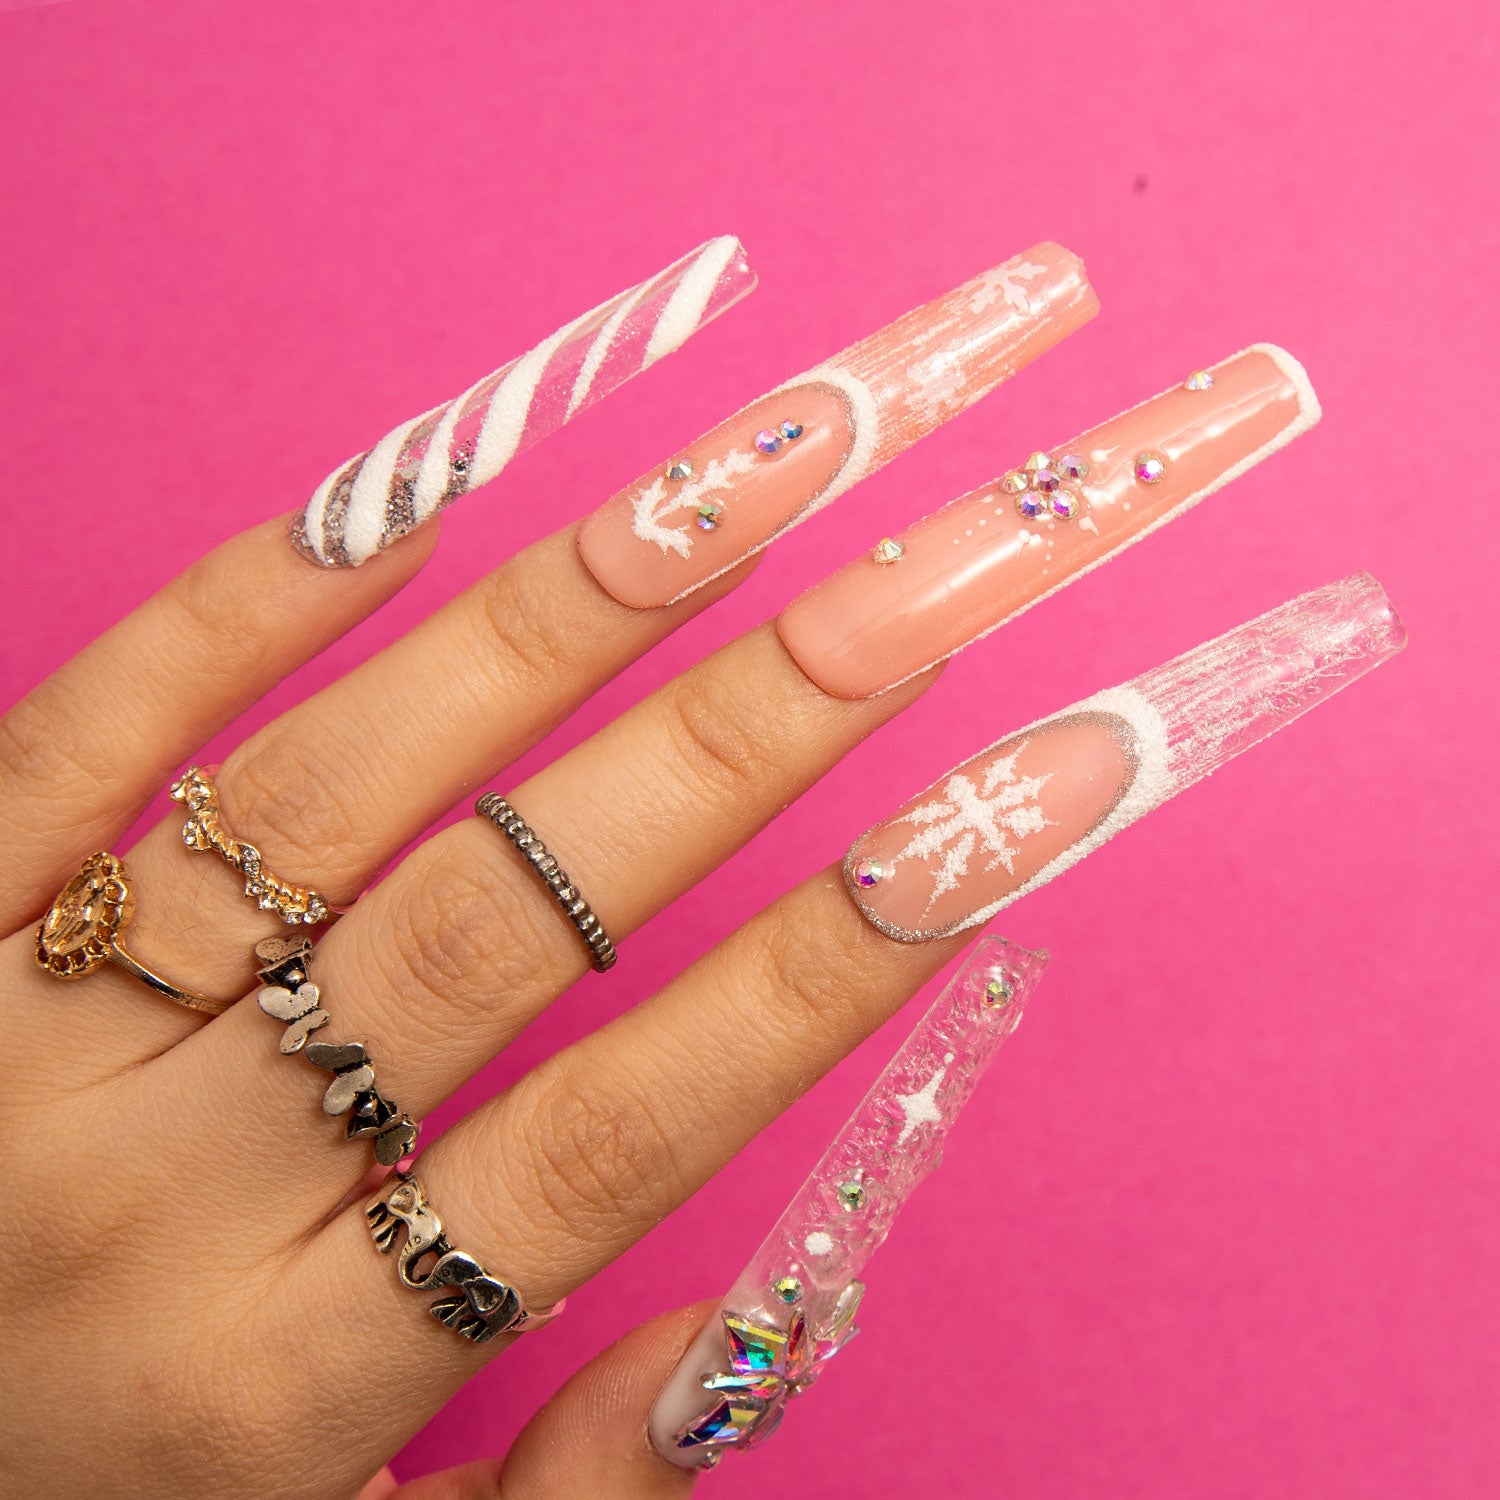 Hand showcasing Lovful's Snowy Moonlight press-on nails with various winter designs, including candy cane stripes and snowflakes, against a pink background.